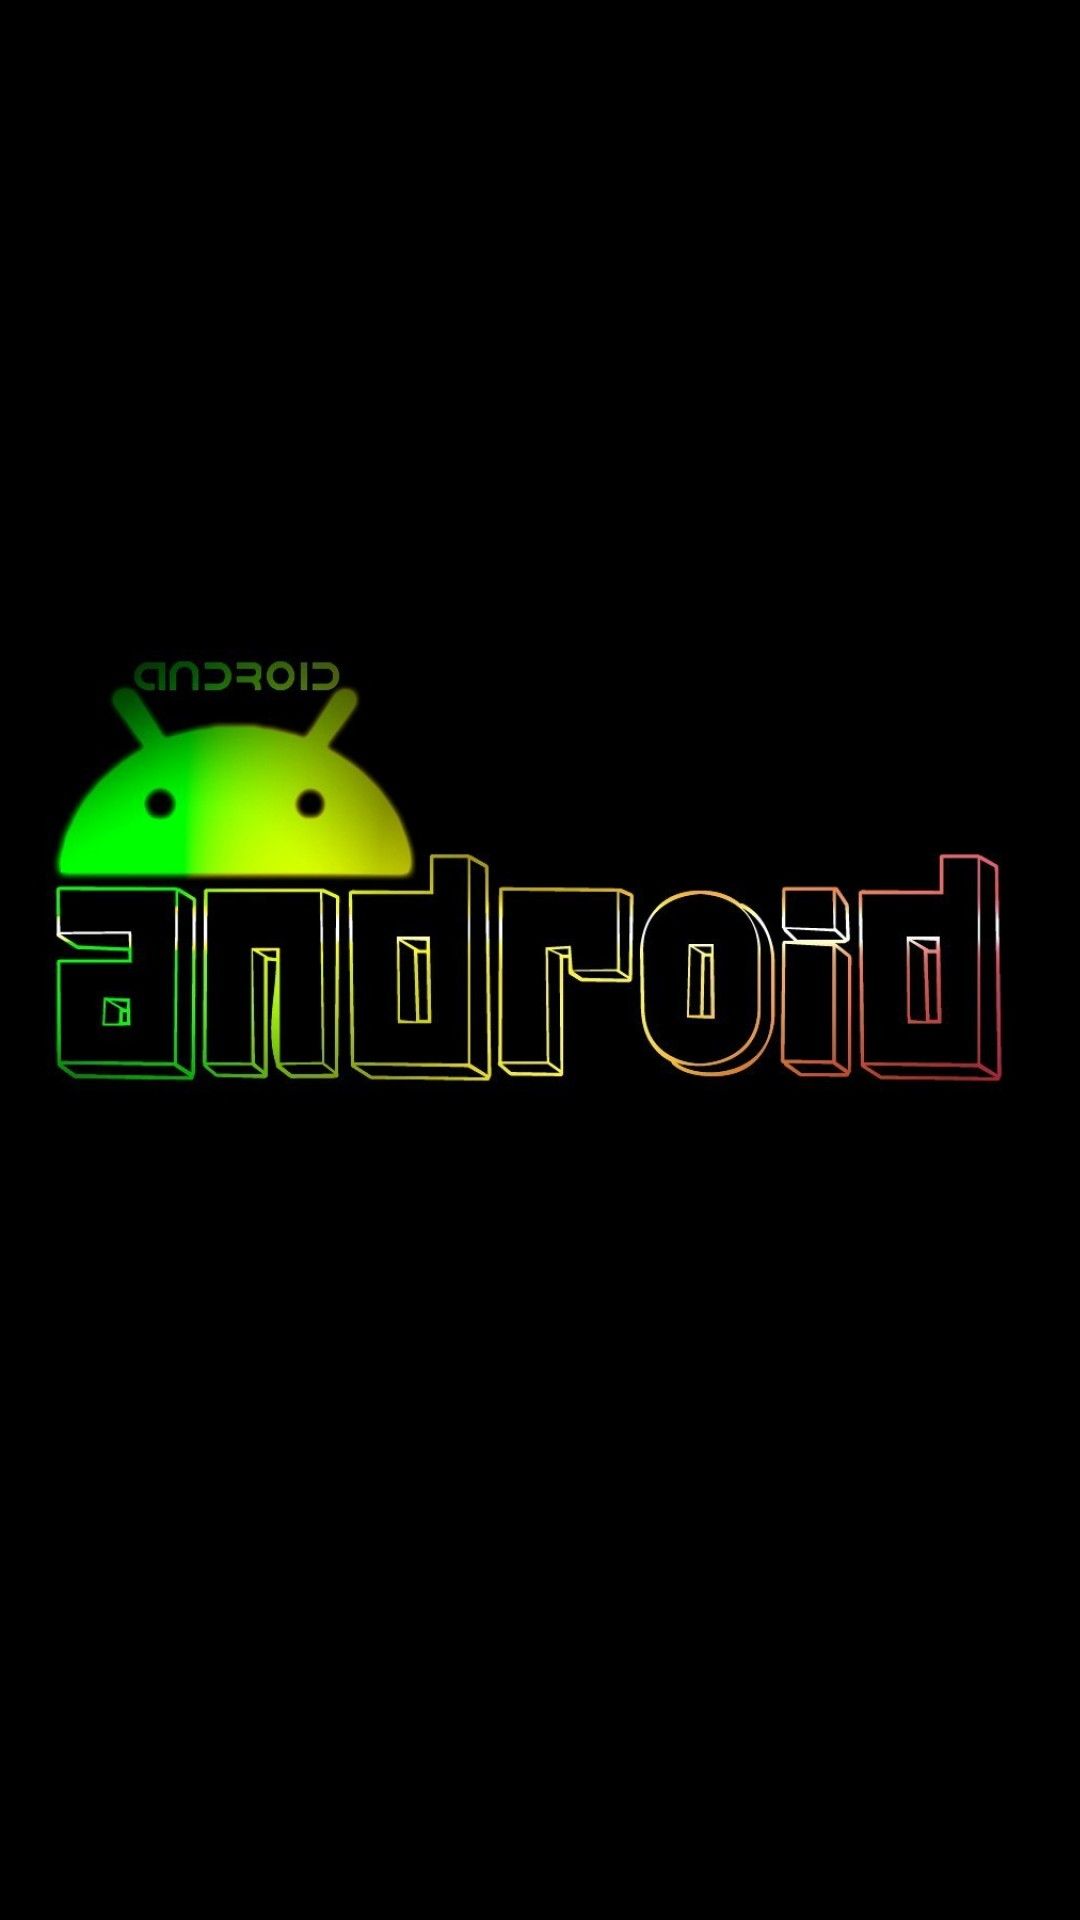 Free download HD android logo wallpaper for mobile 1080x1920